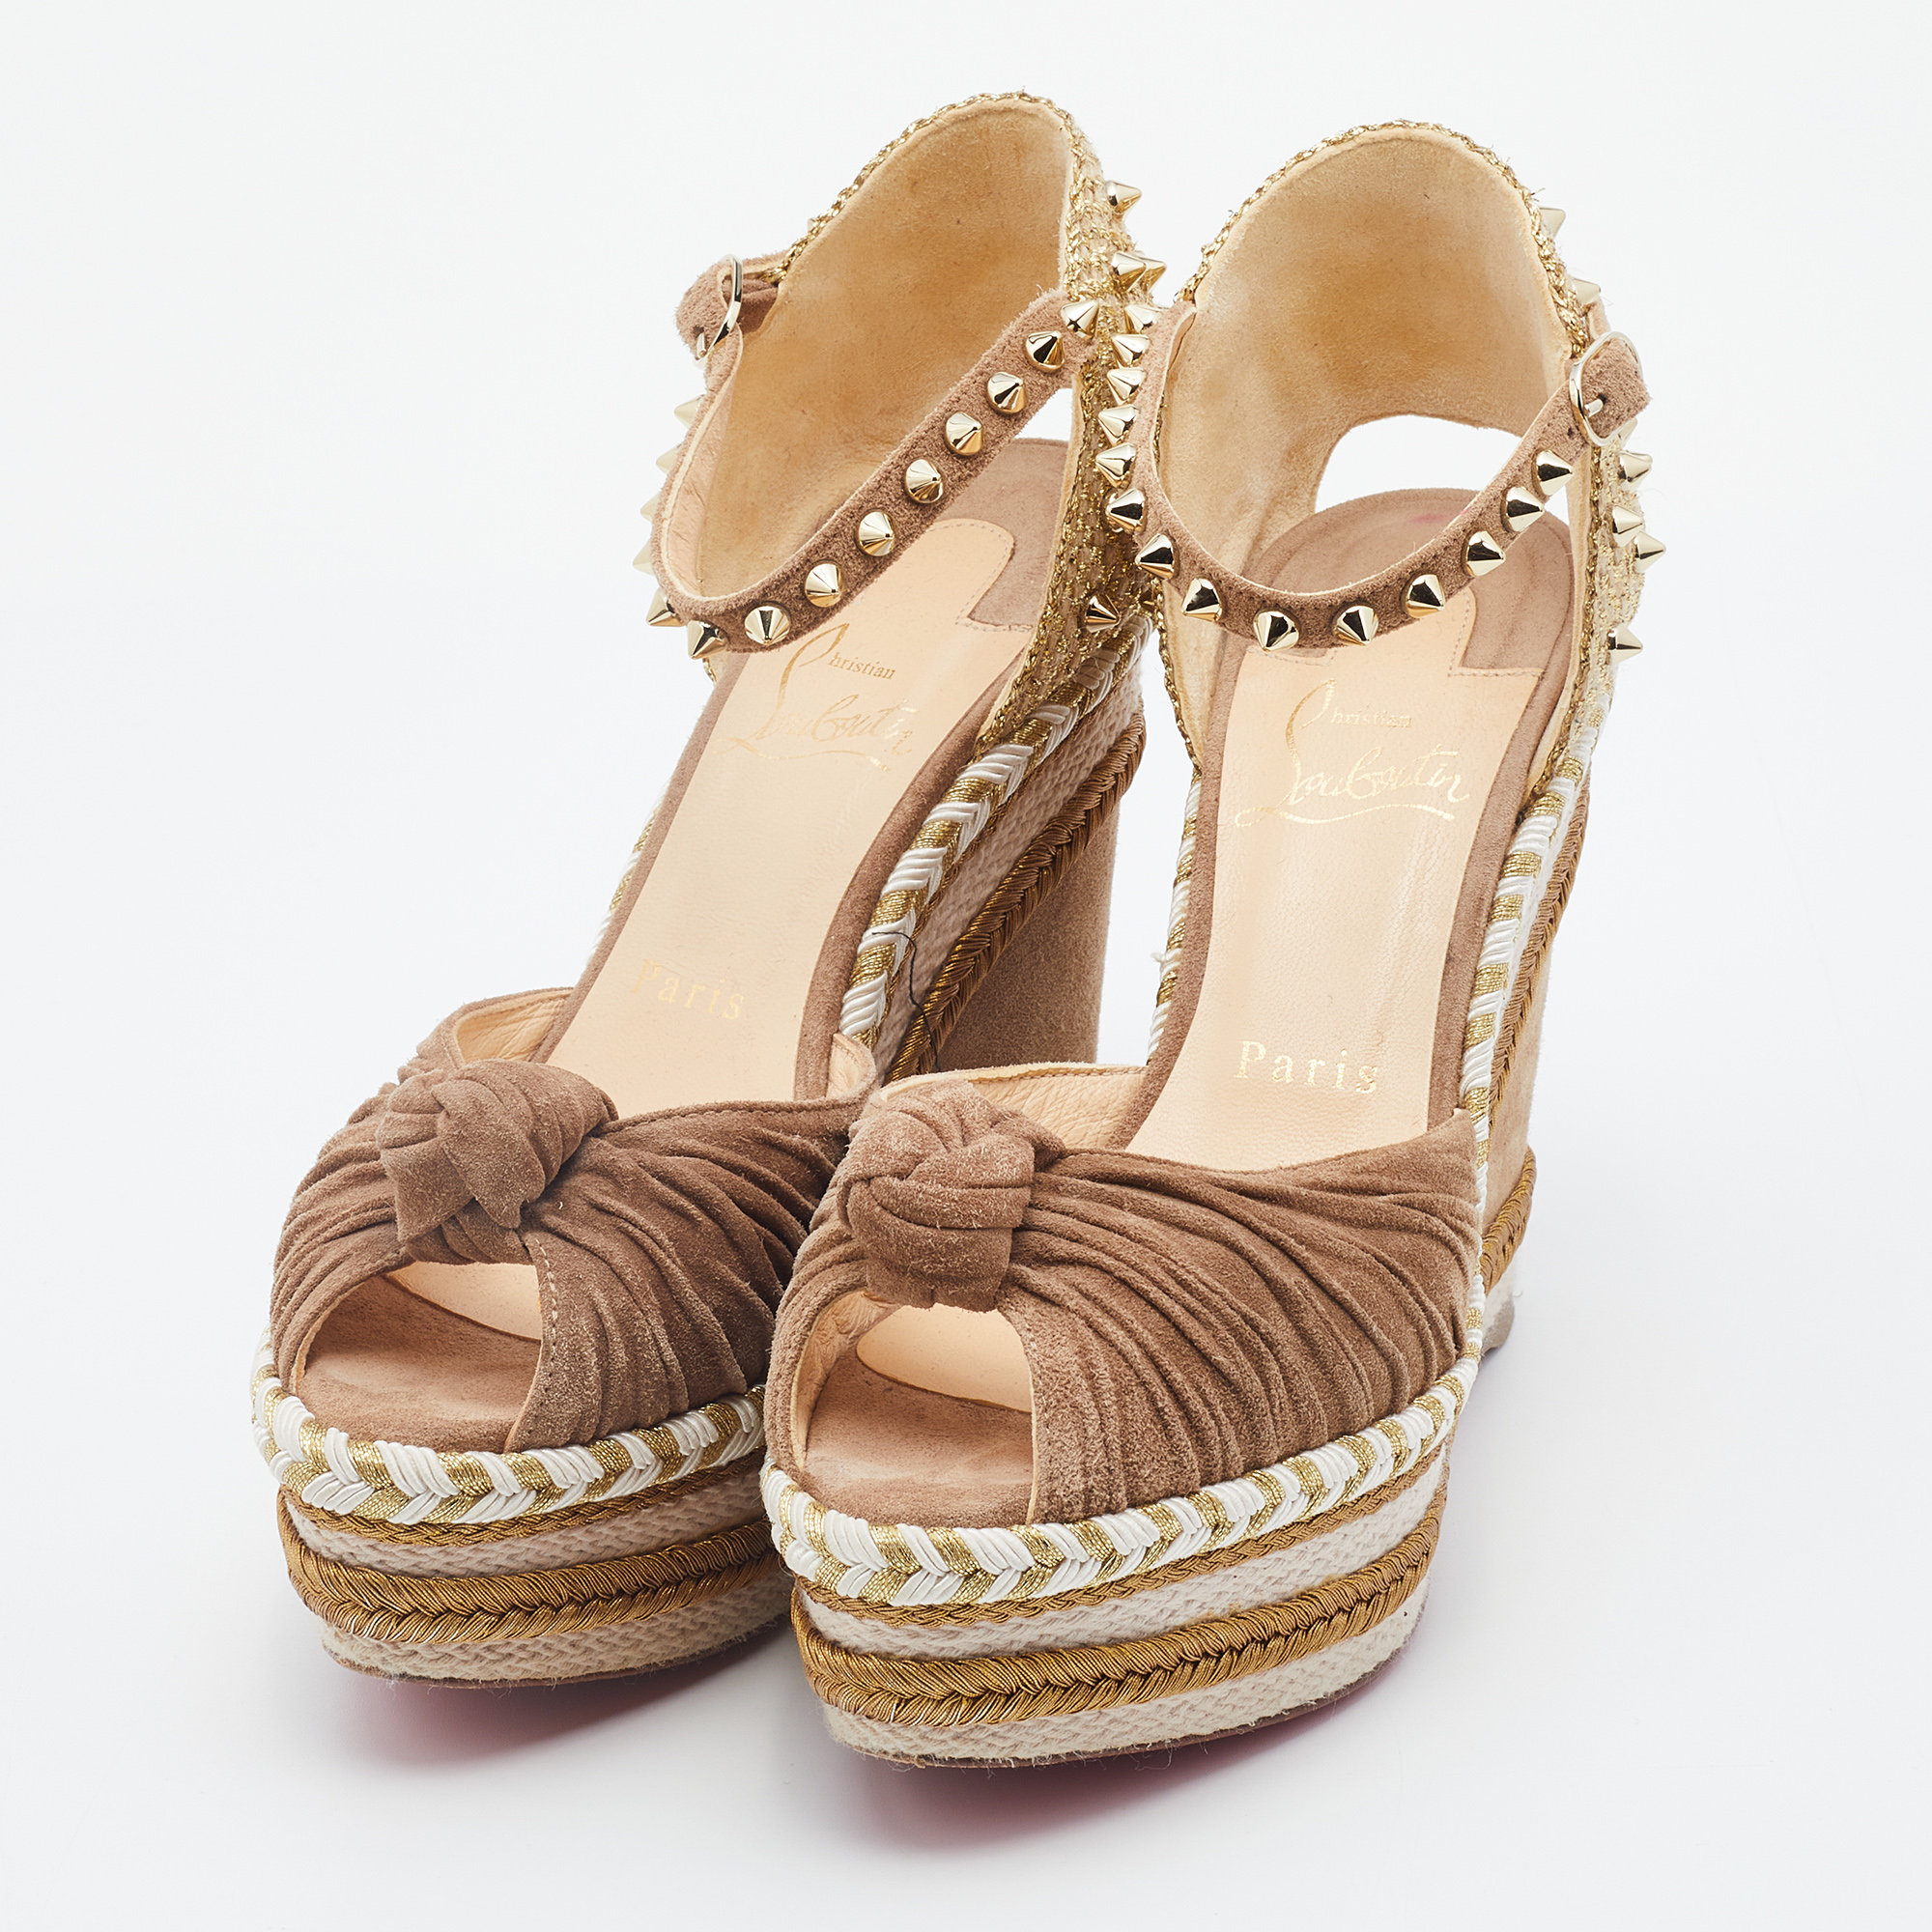 

Christian Louboutin Taupe/Gold Leather Madmonica Madcarina Spiked Platform Wedge Espadrilles Size, Brown